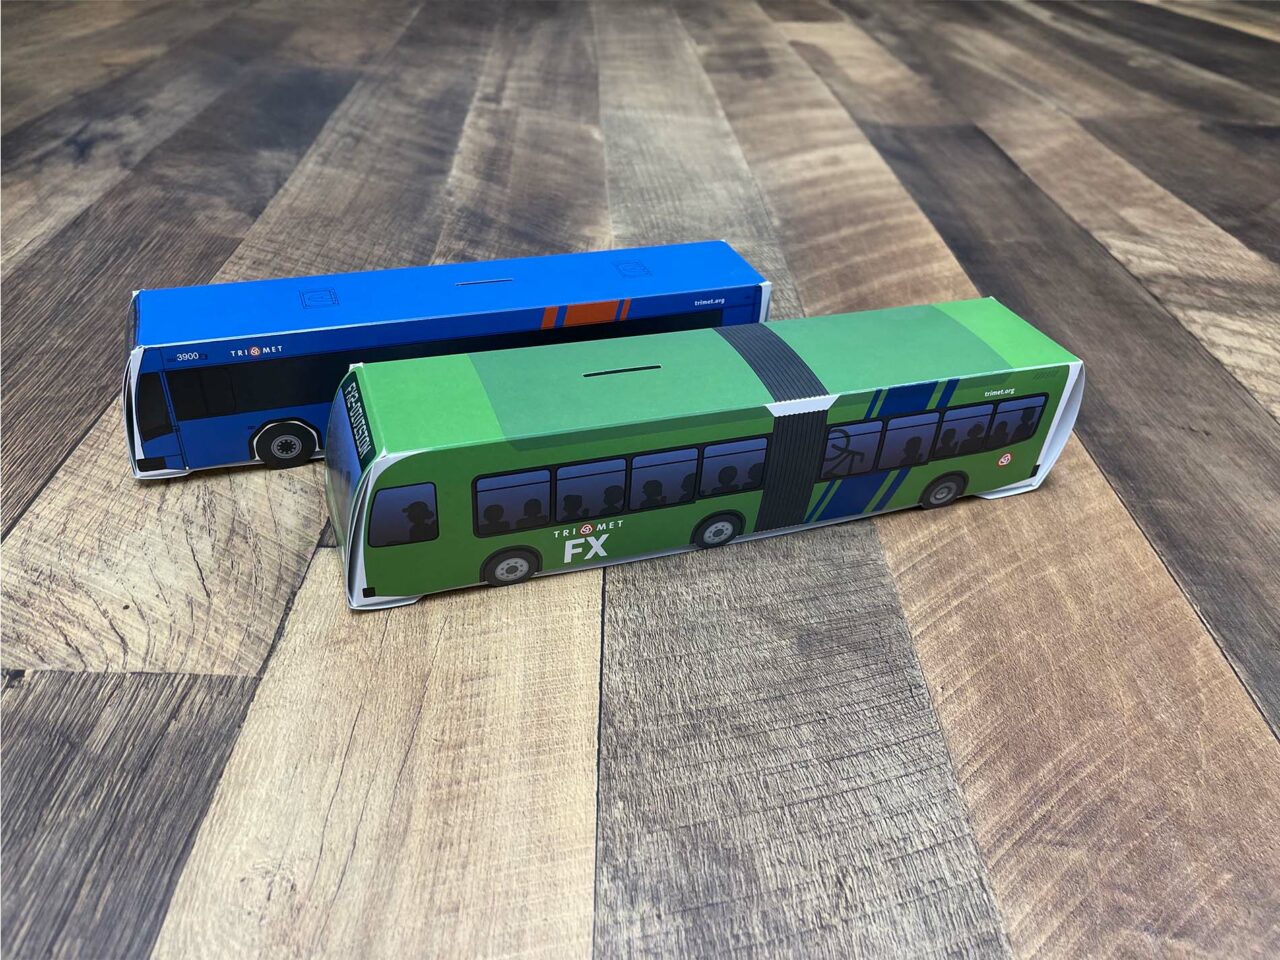 Example of Morel's packaging capabilities, showing custom branded box made to look like a TriMet bus